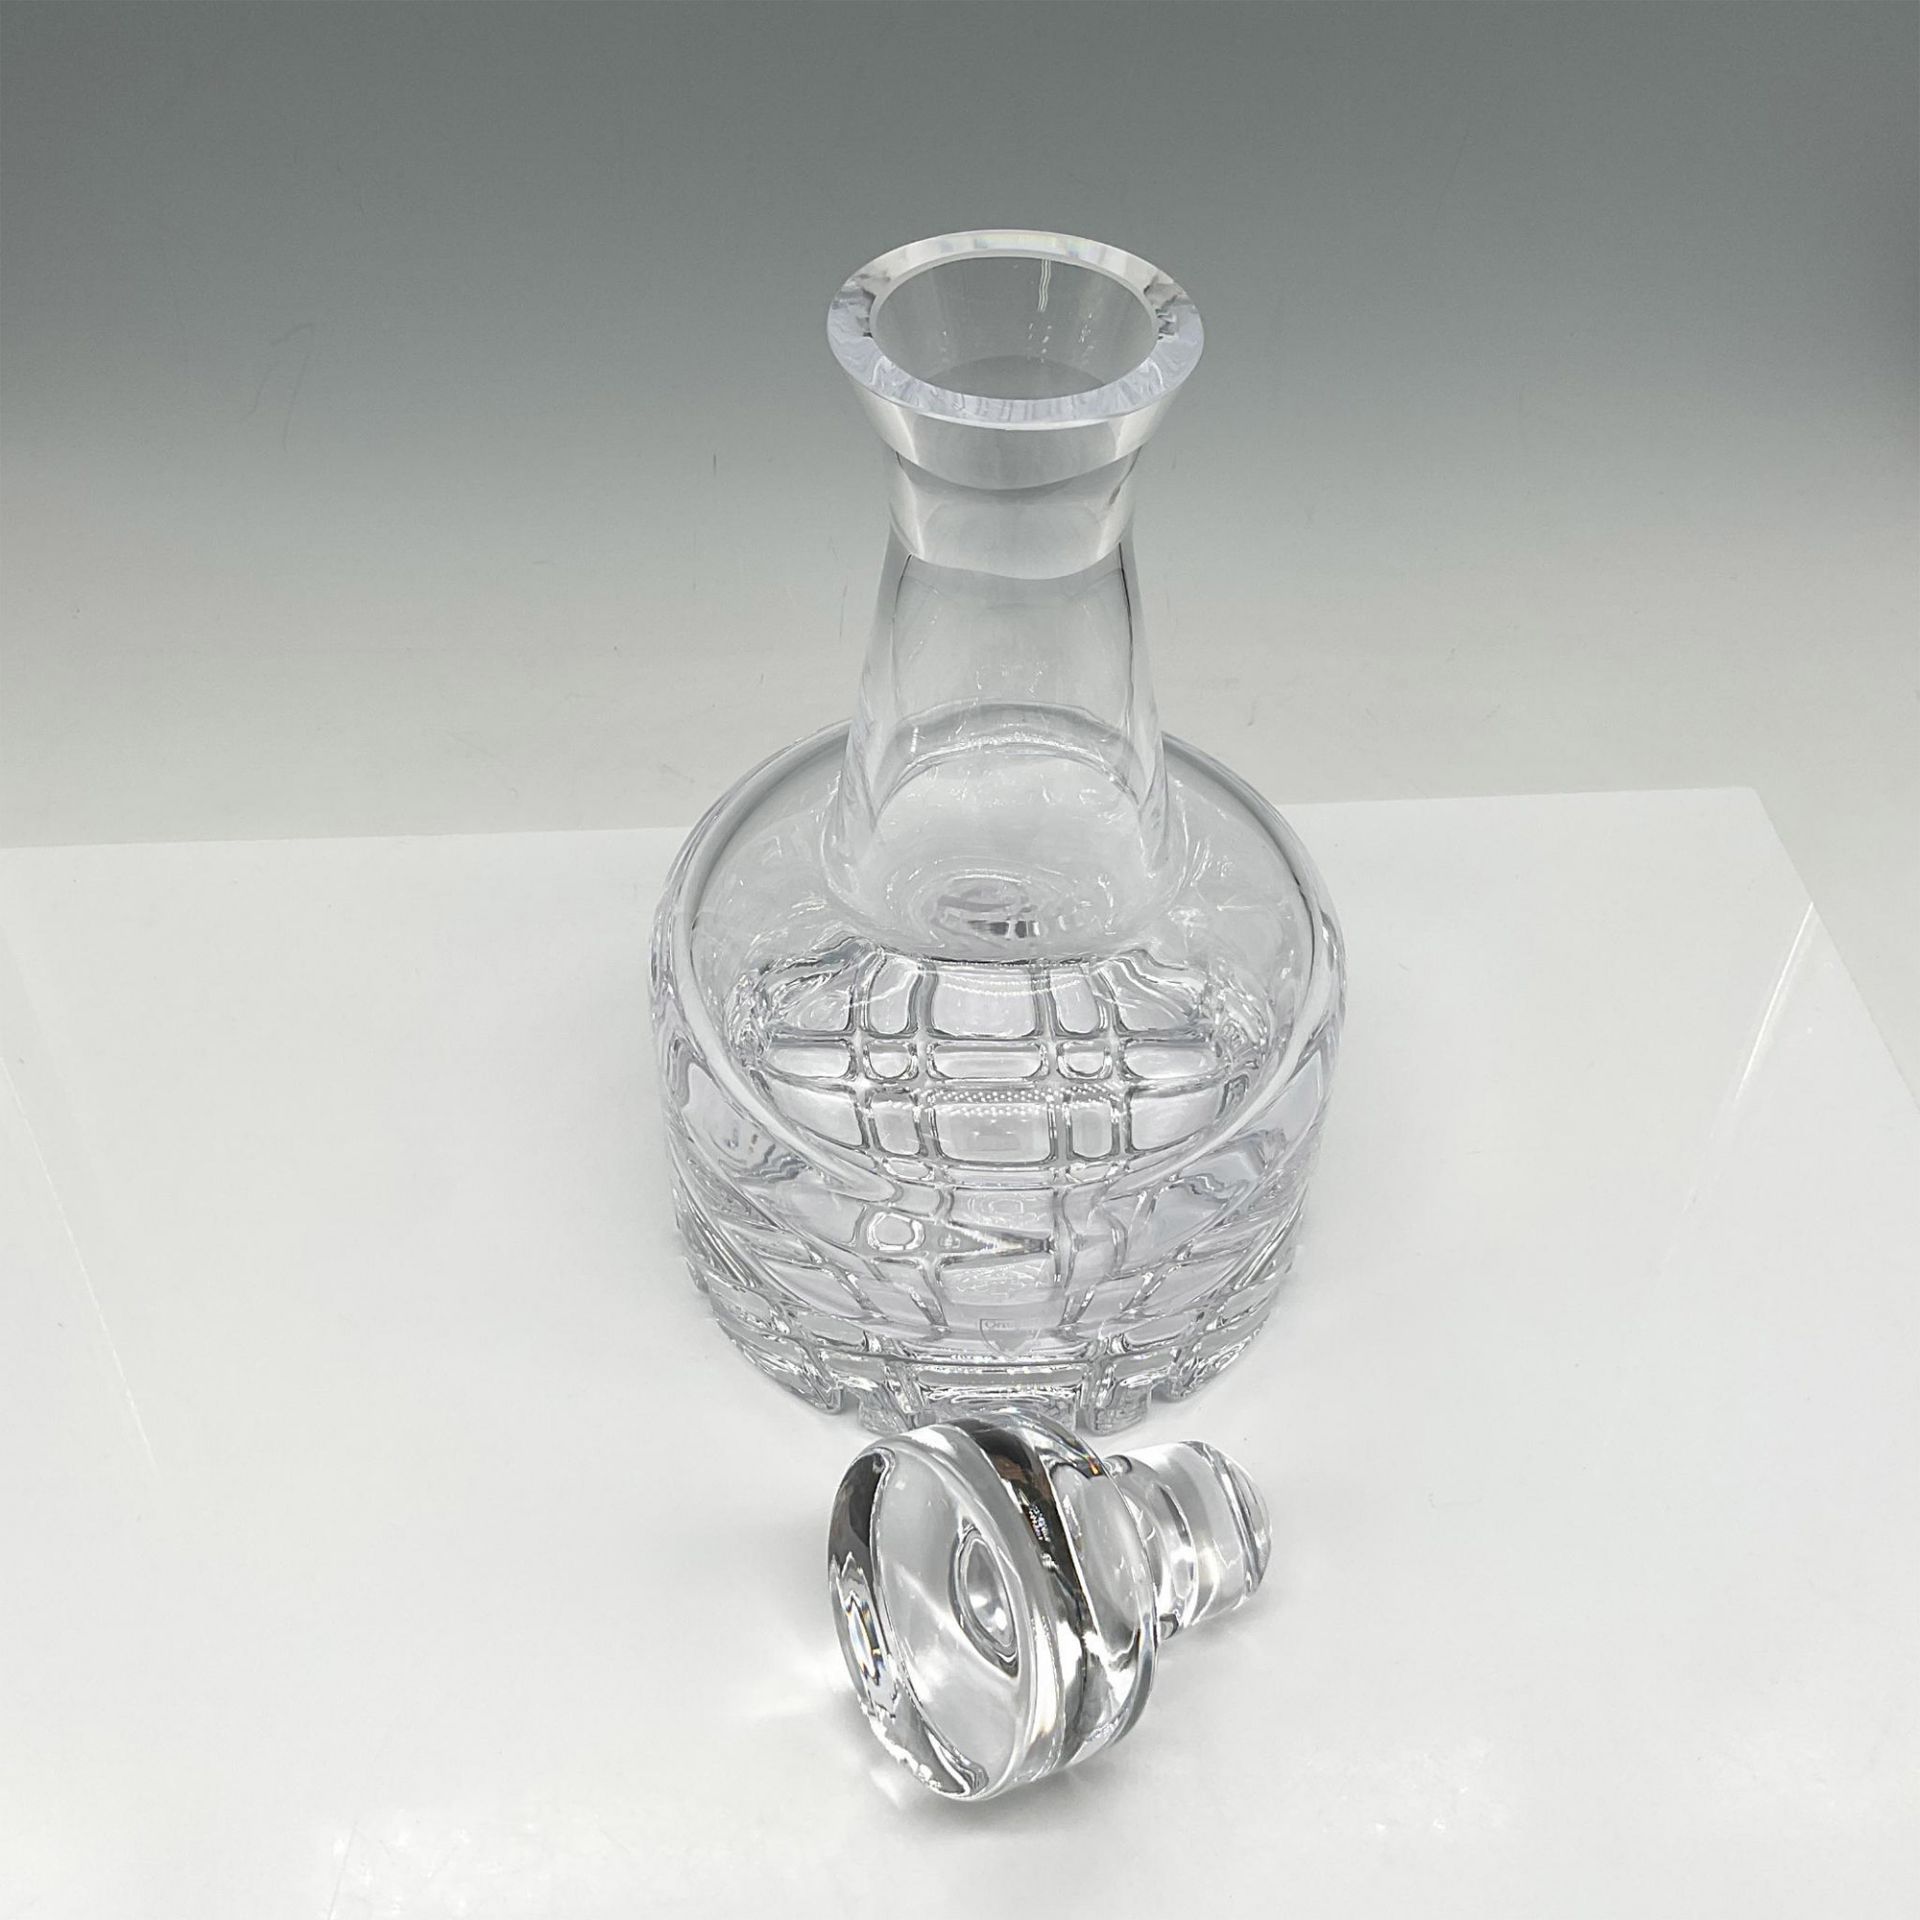 Orrefors Crystal Decanter with Stopper, Erik - Image 2 of 3